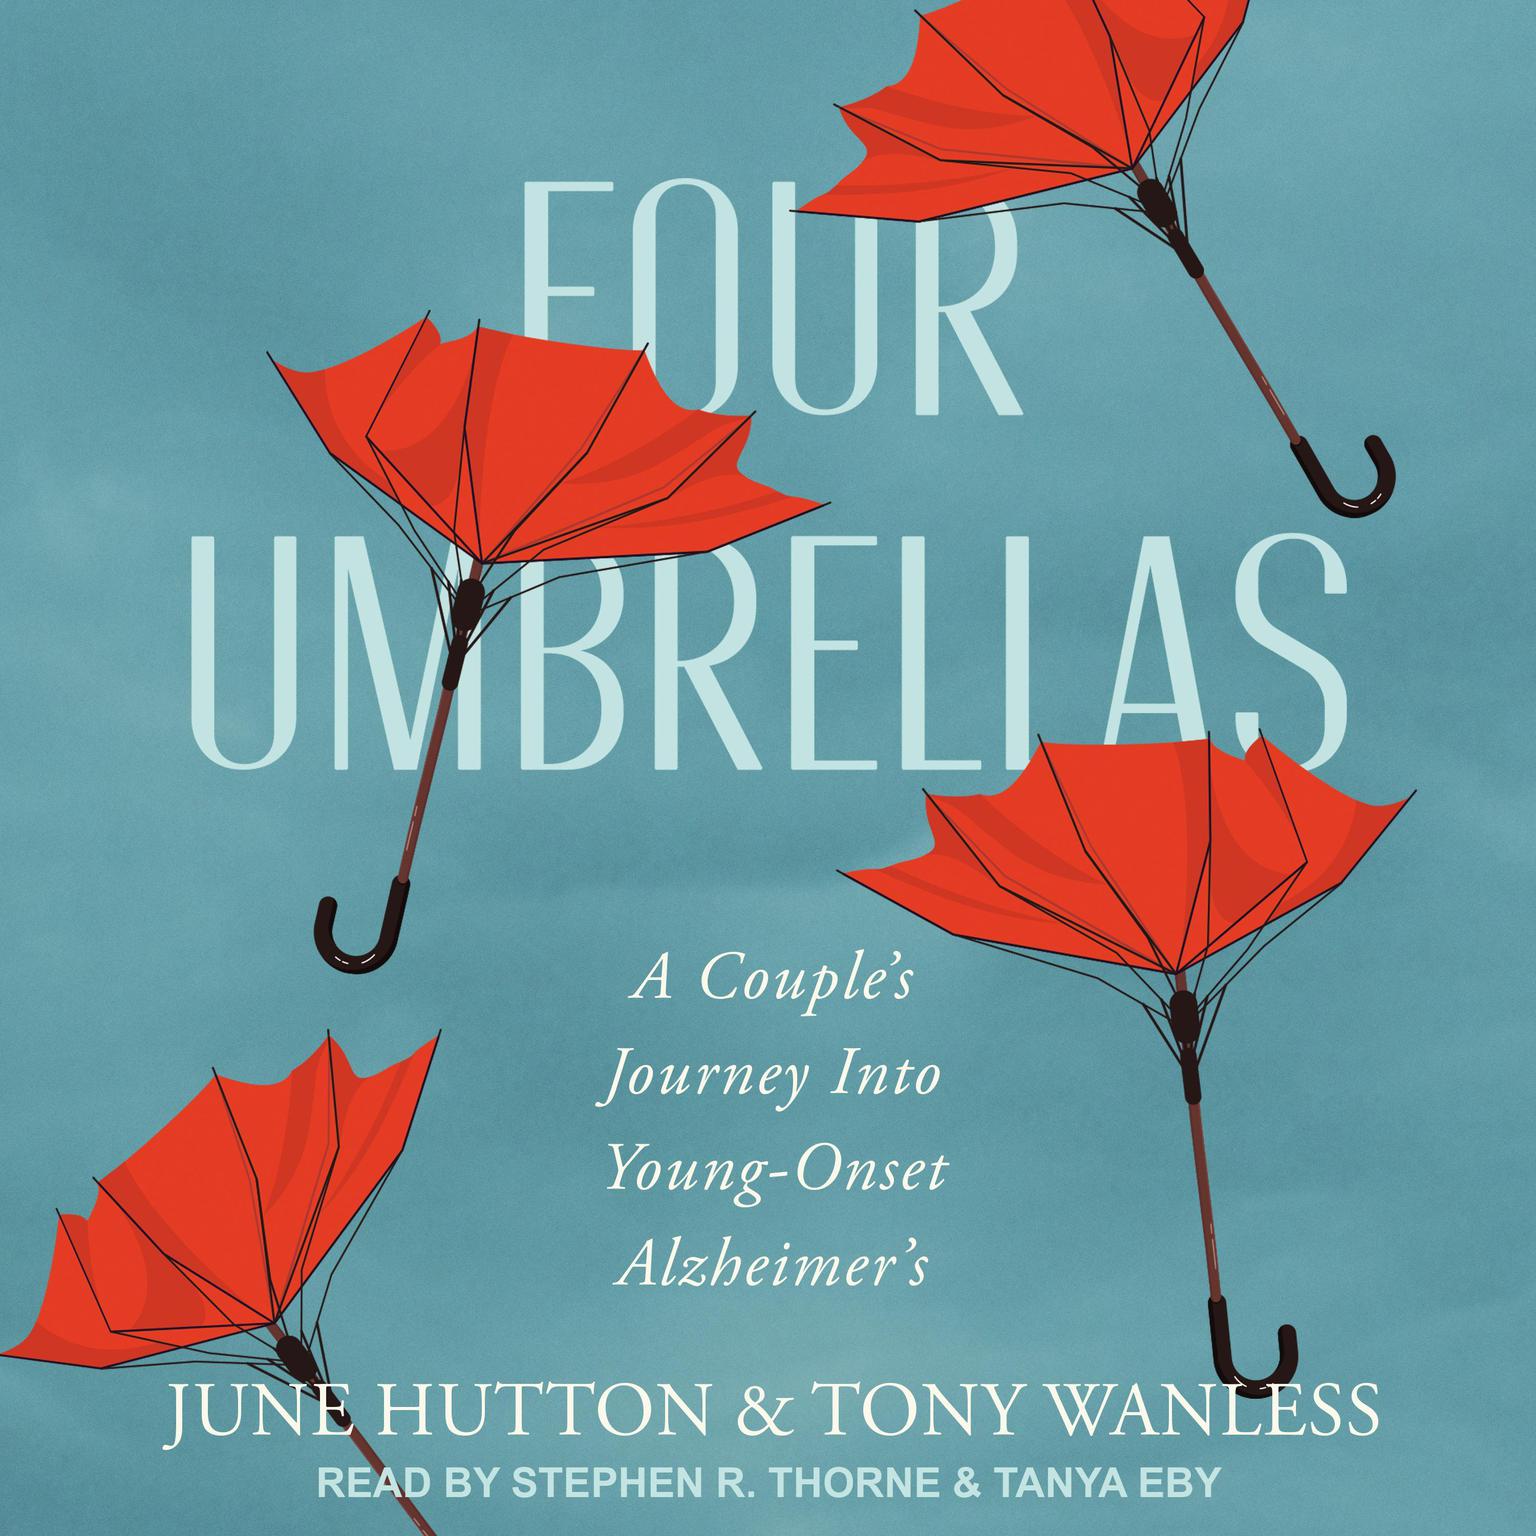 Four Umbrellas: A Couples Journey Into Young-Onset Alzheimers Audiobook, by June Hutton